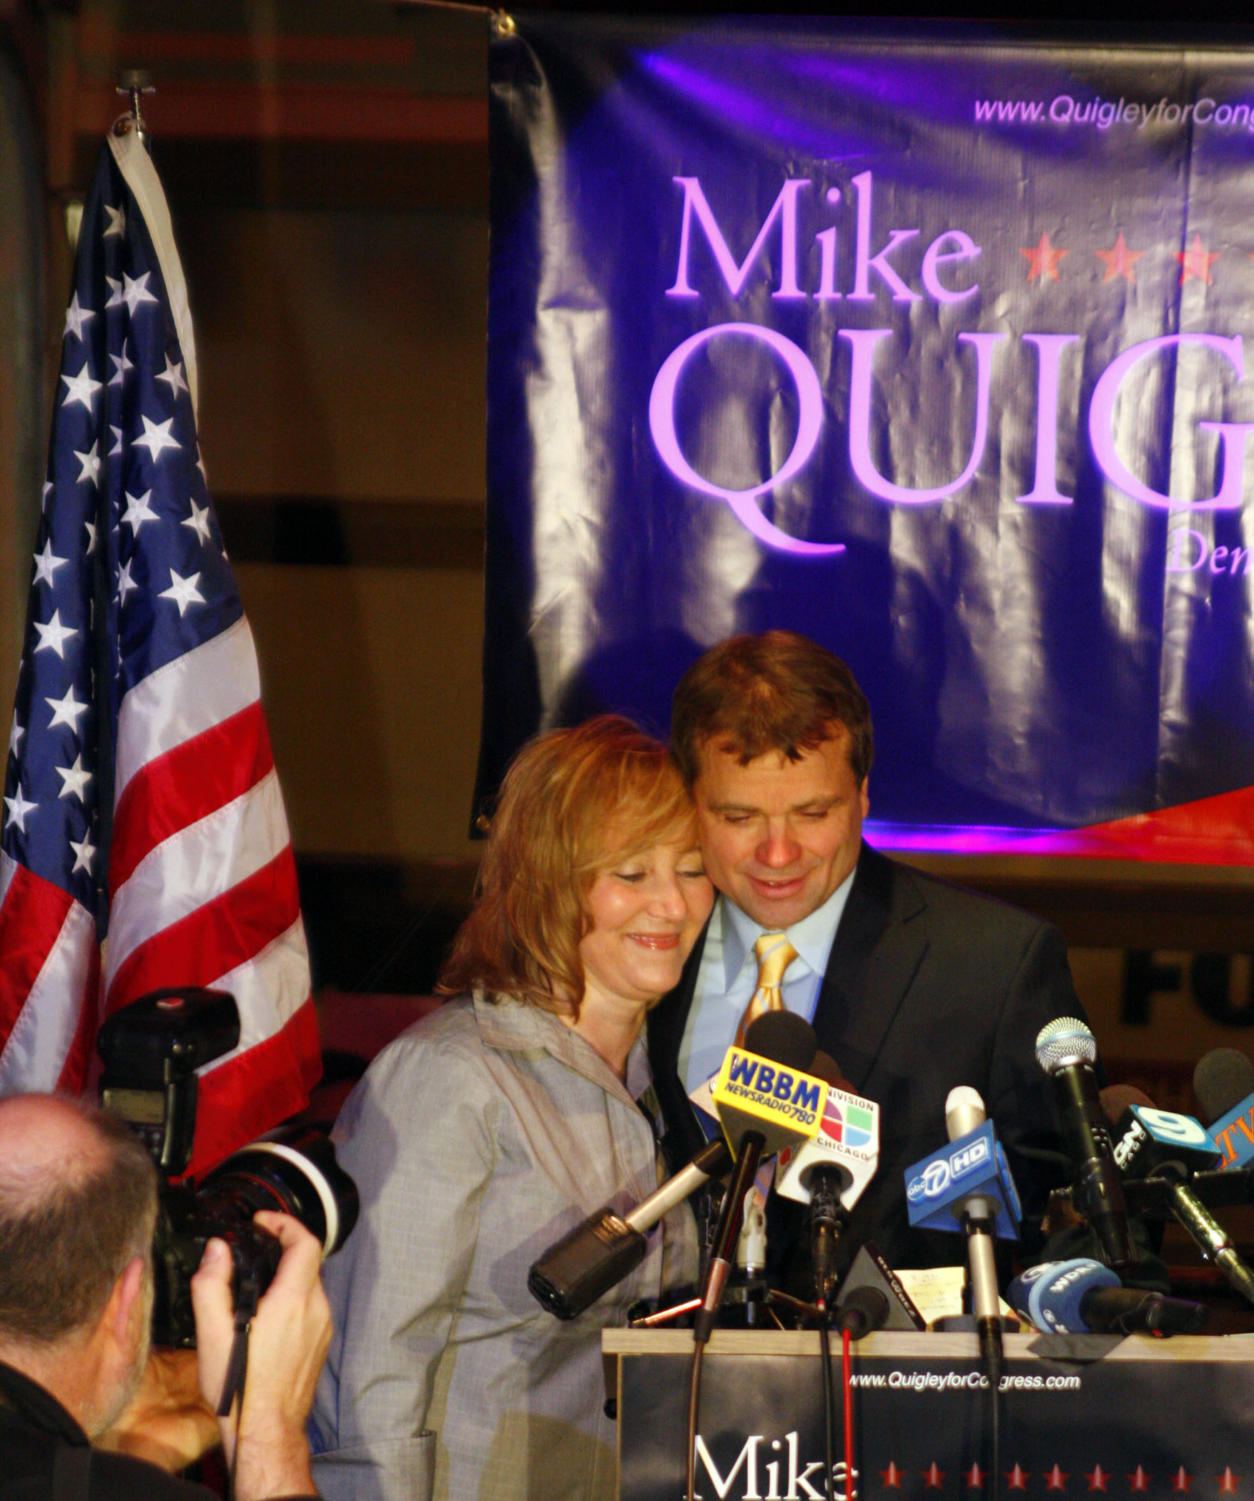 Mike Quigley embraces his wife, Barbara, during his victory speech for Illinois's 5th Congressional District Democrat primary Tuesday night at the Red Ivy bar and restaurant in Wrigleyville.